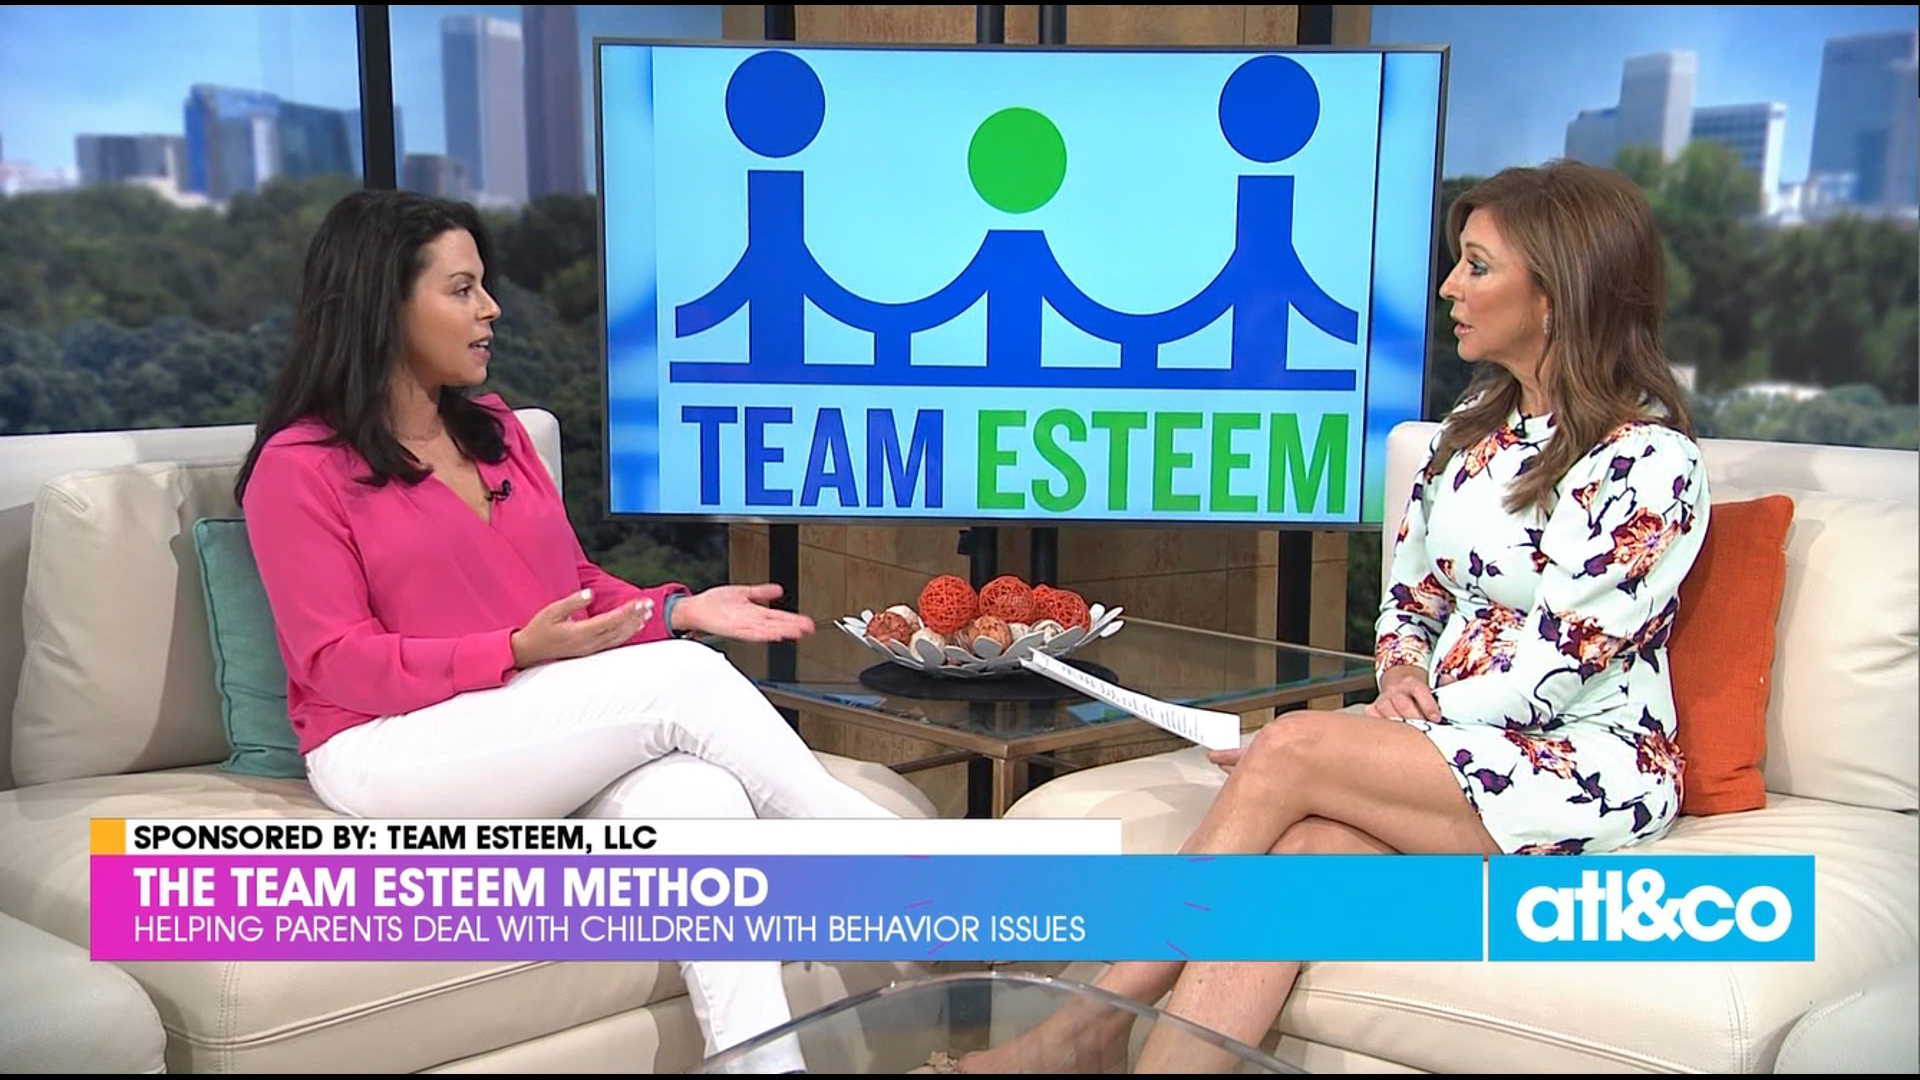 See how Team Esteem helps parents deal with children with behavioral issues.